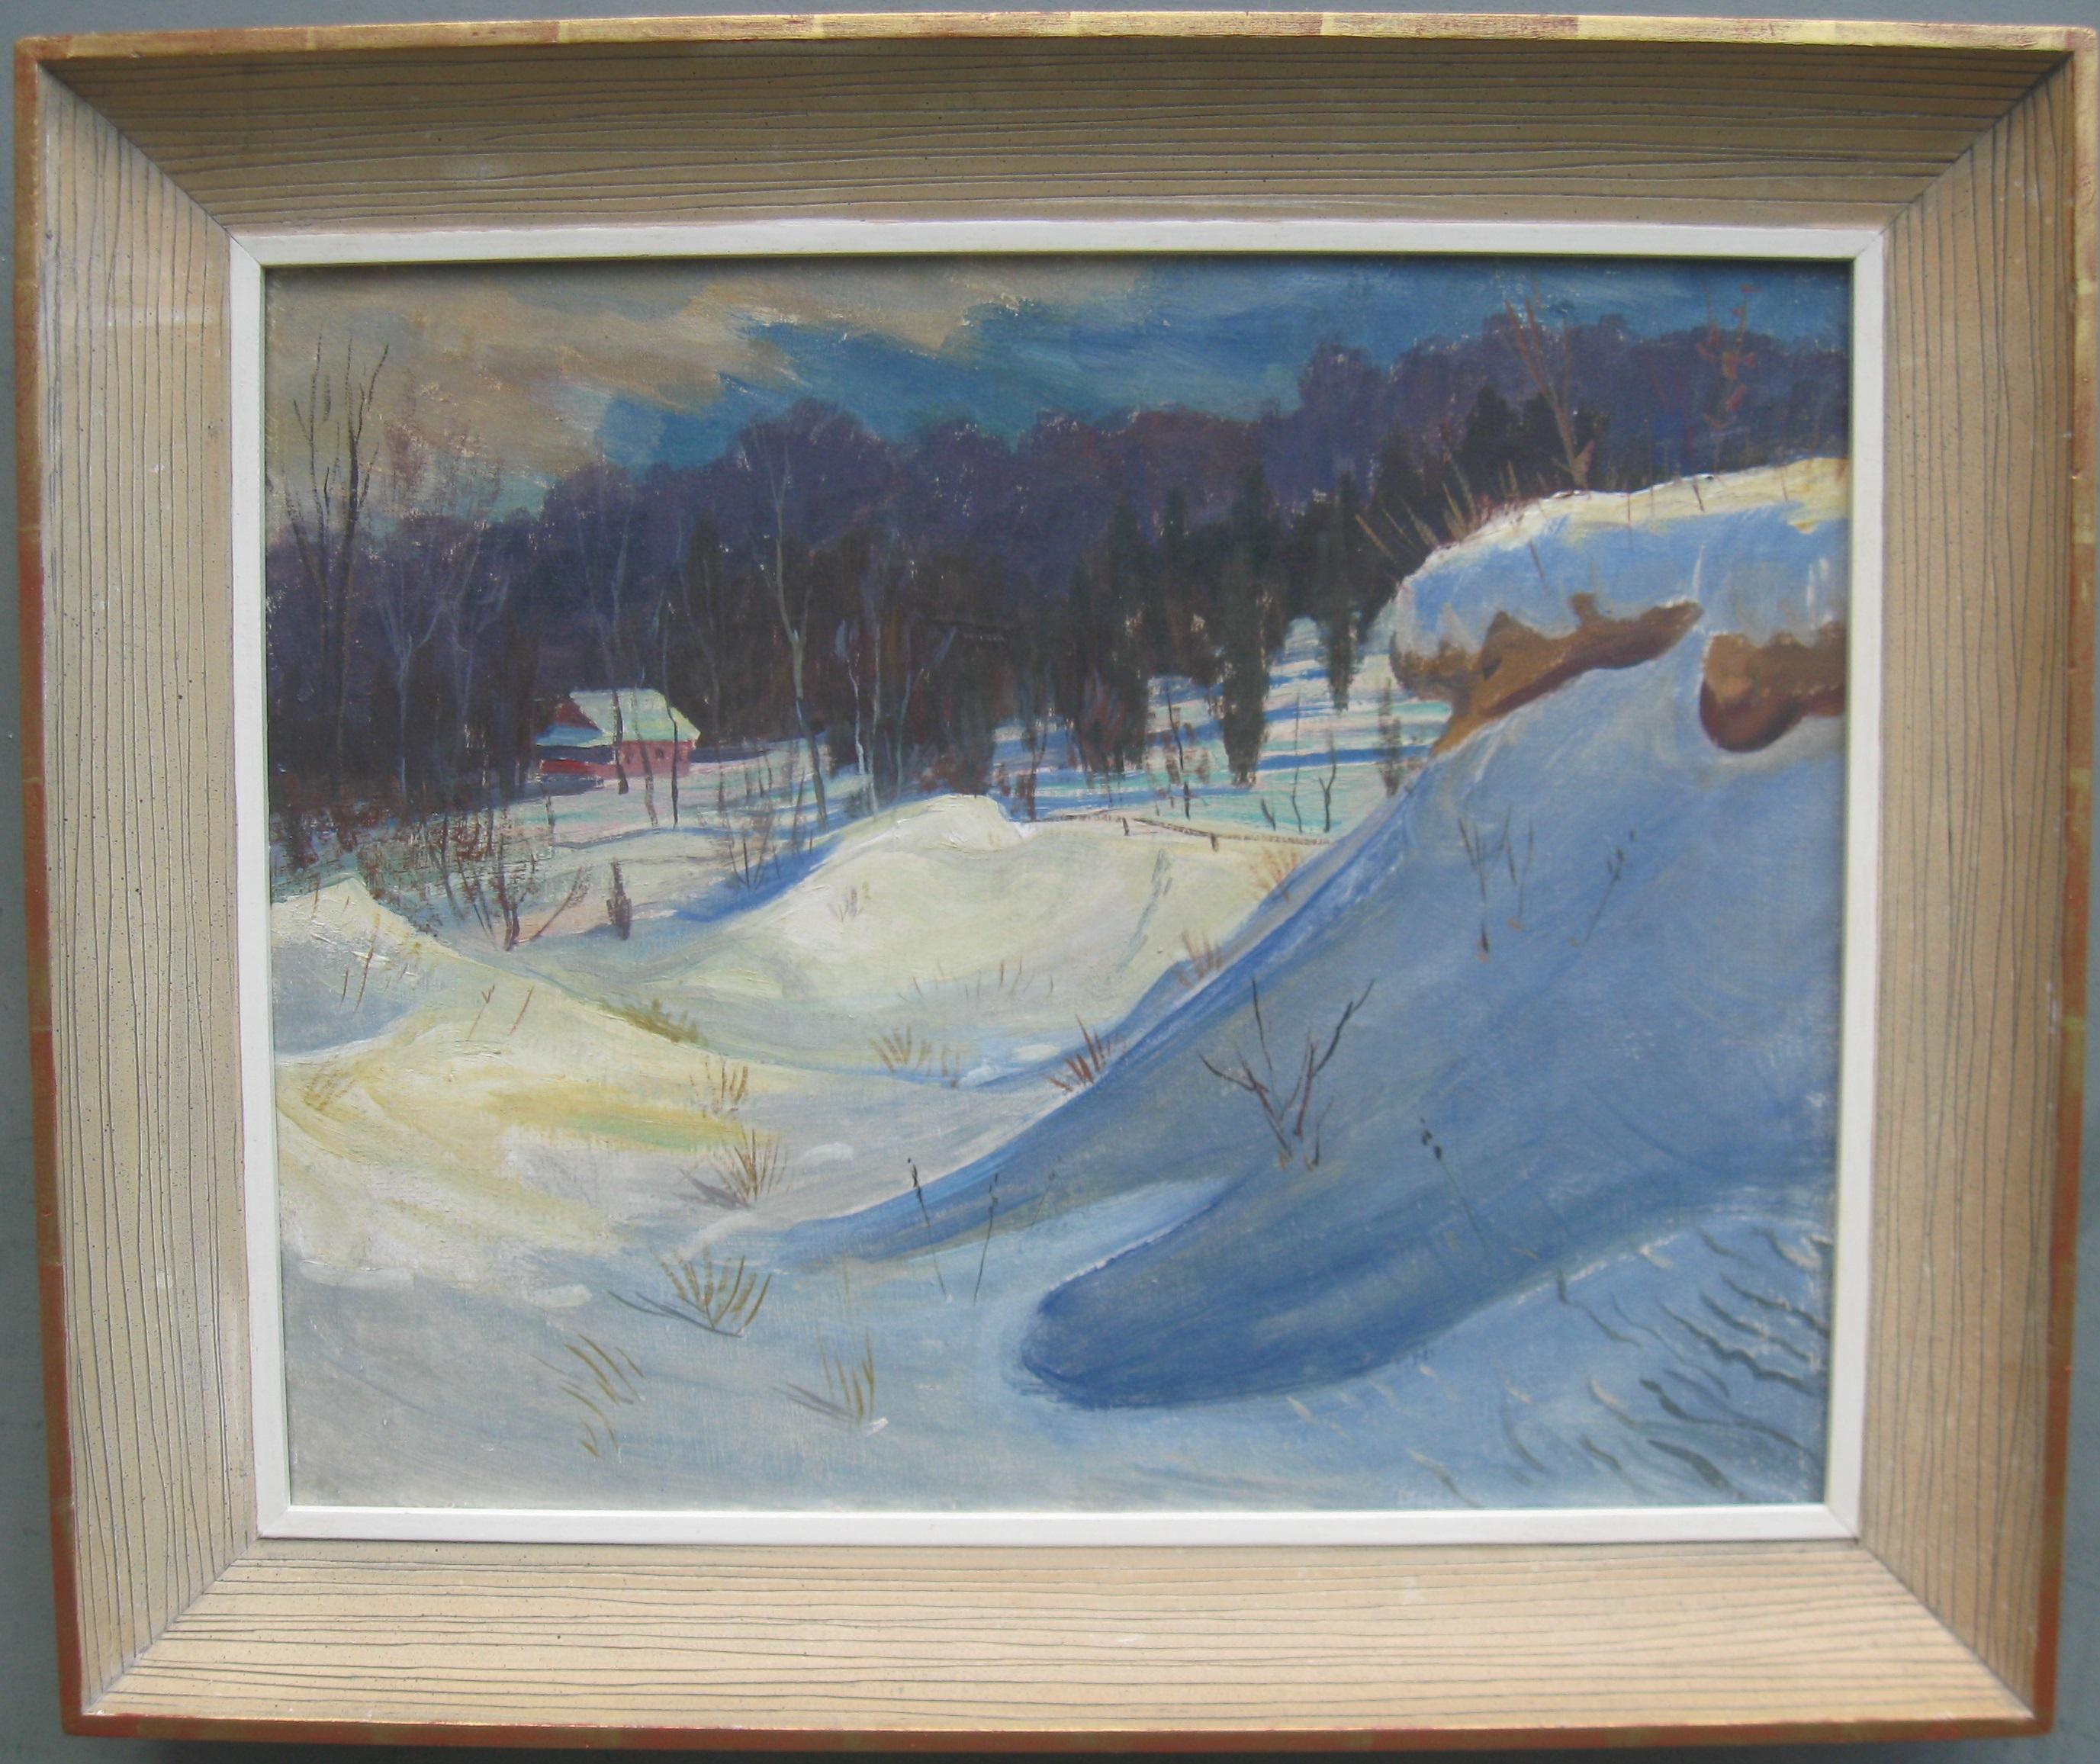 Snowdrifts in a Wooded Landscape oil on canvas circa 1950's